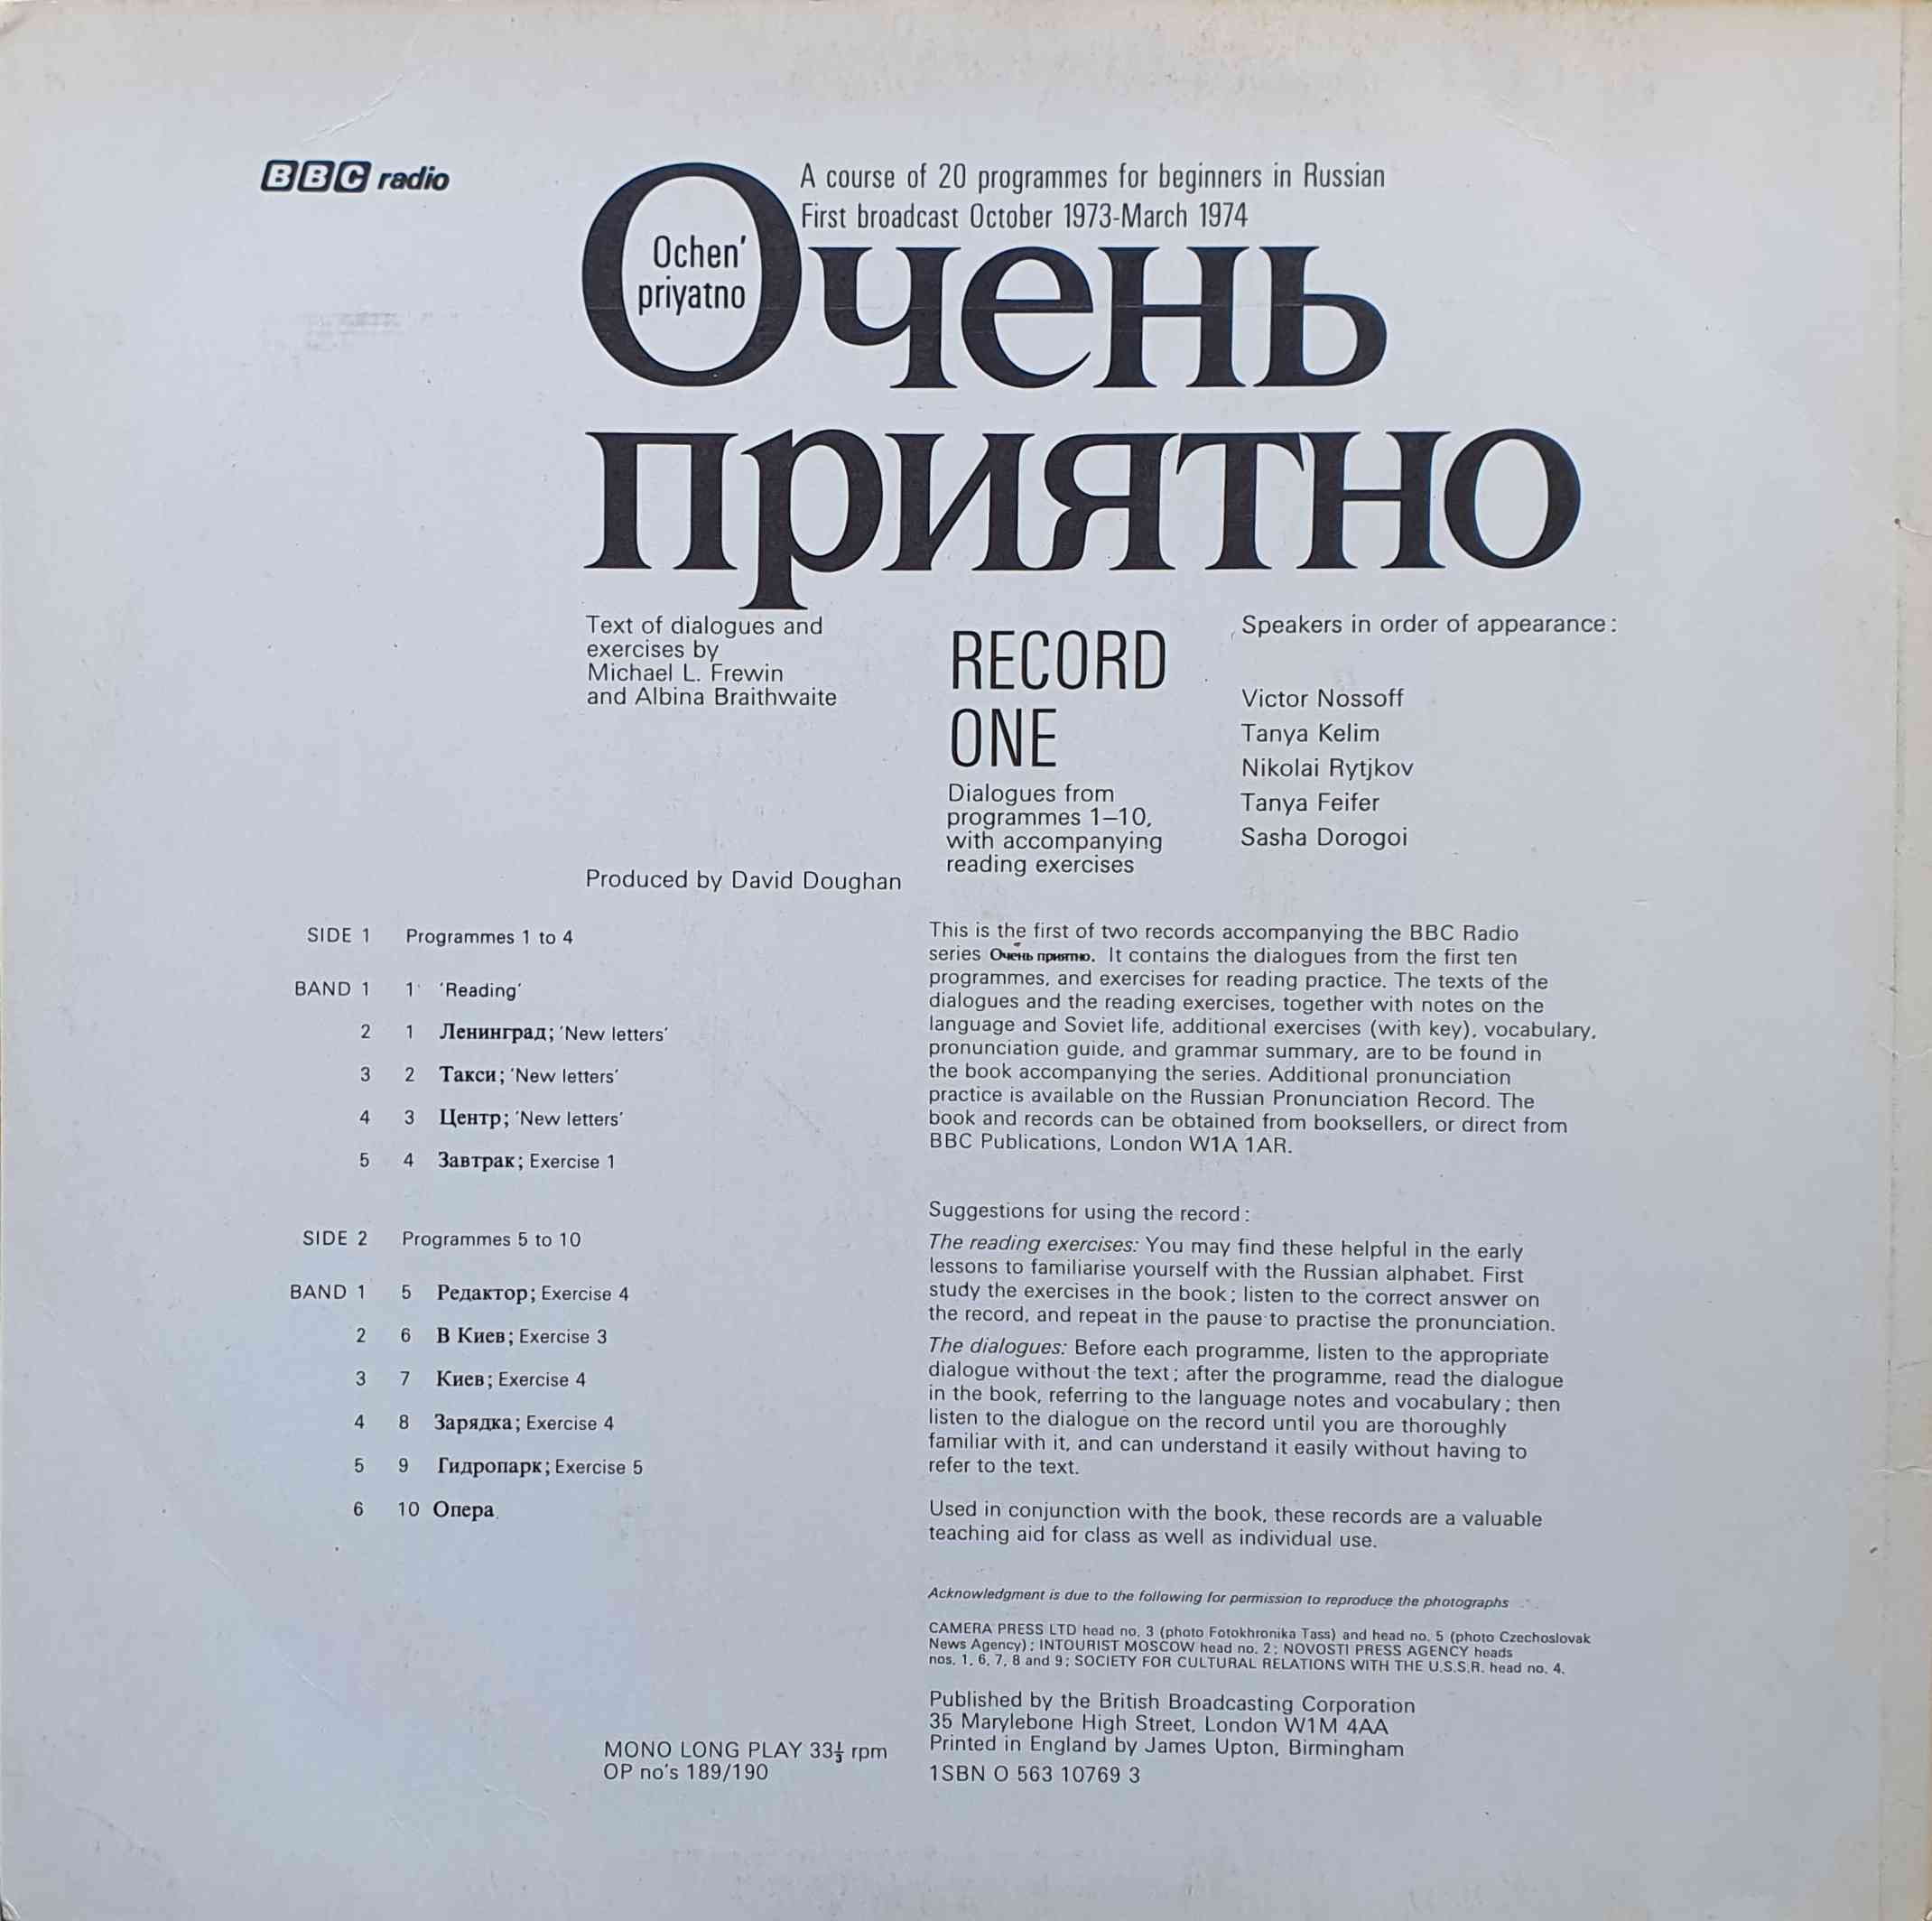 Picture of OP 189/190 Ochen' priyatno Record 1 - A BBC Radio course for beginners in Russian - Record 1 - Programmes 1 - 10 by artist Michael L. Frewin / Albina Braithwaite from the BBC records and Tapes library